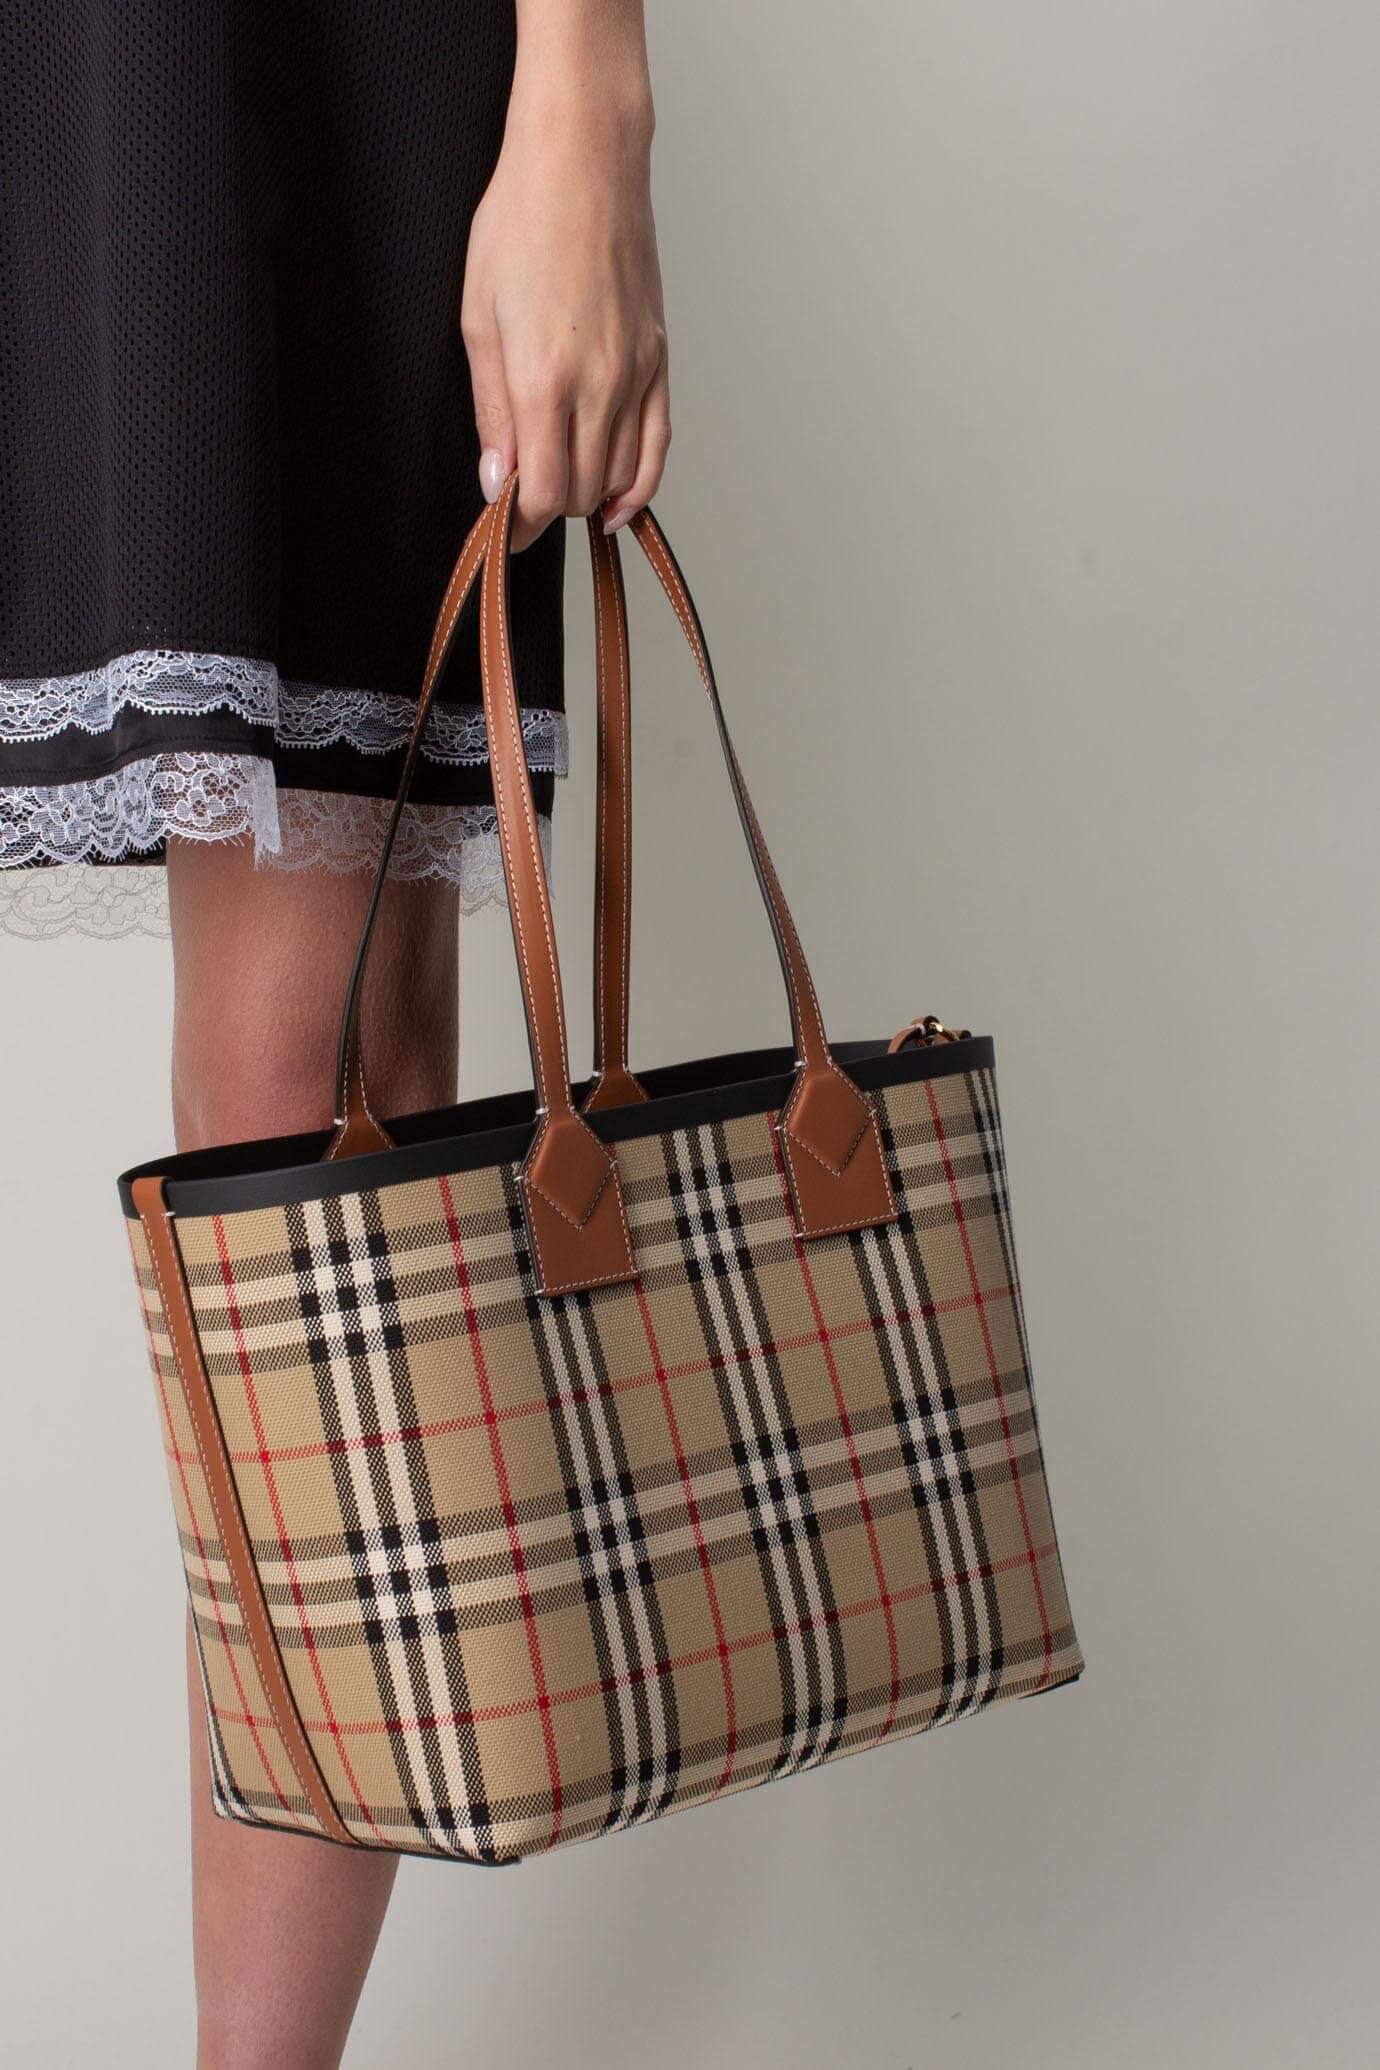 Burberry Vintage Check Medium The Giant Reversible Tote